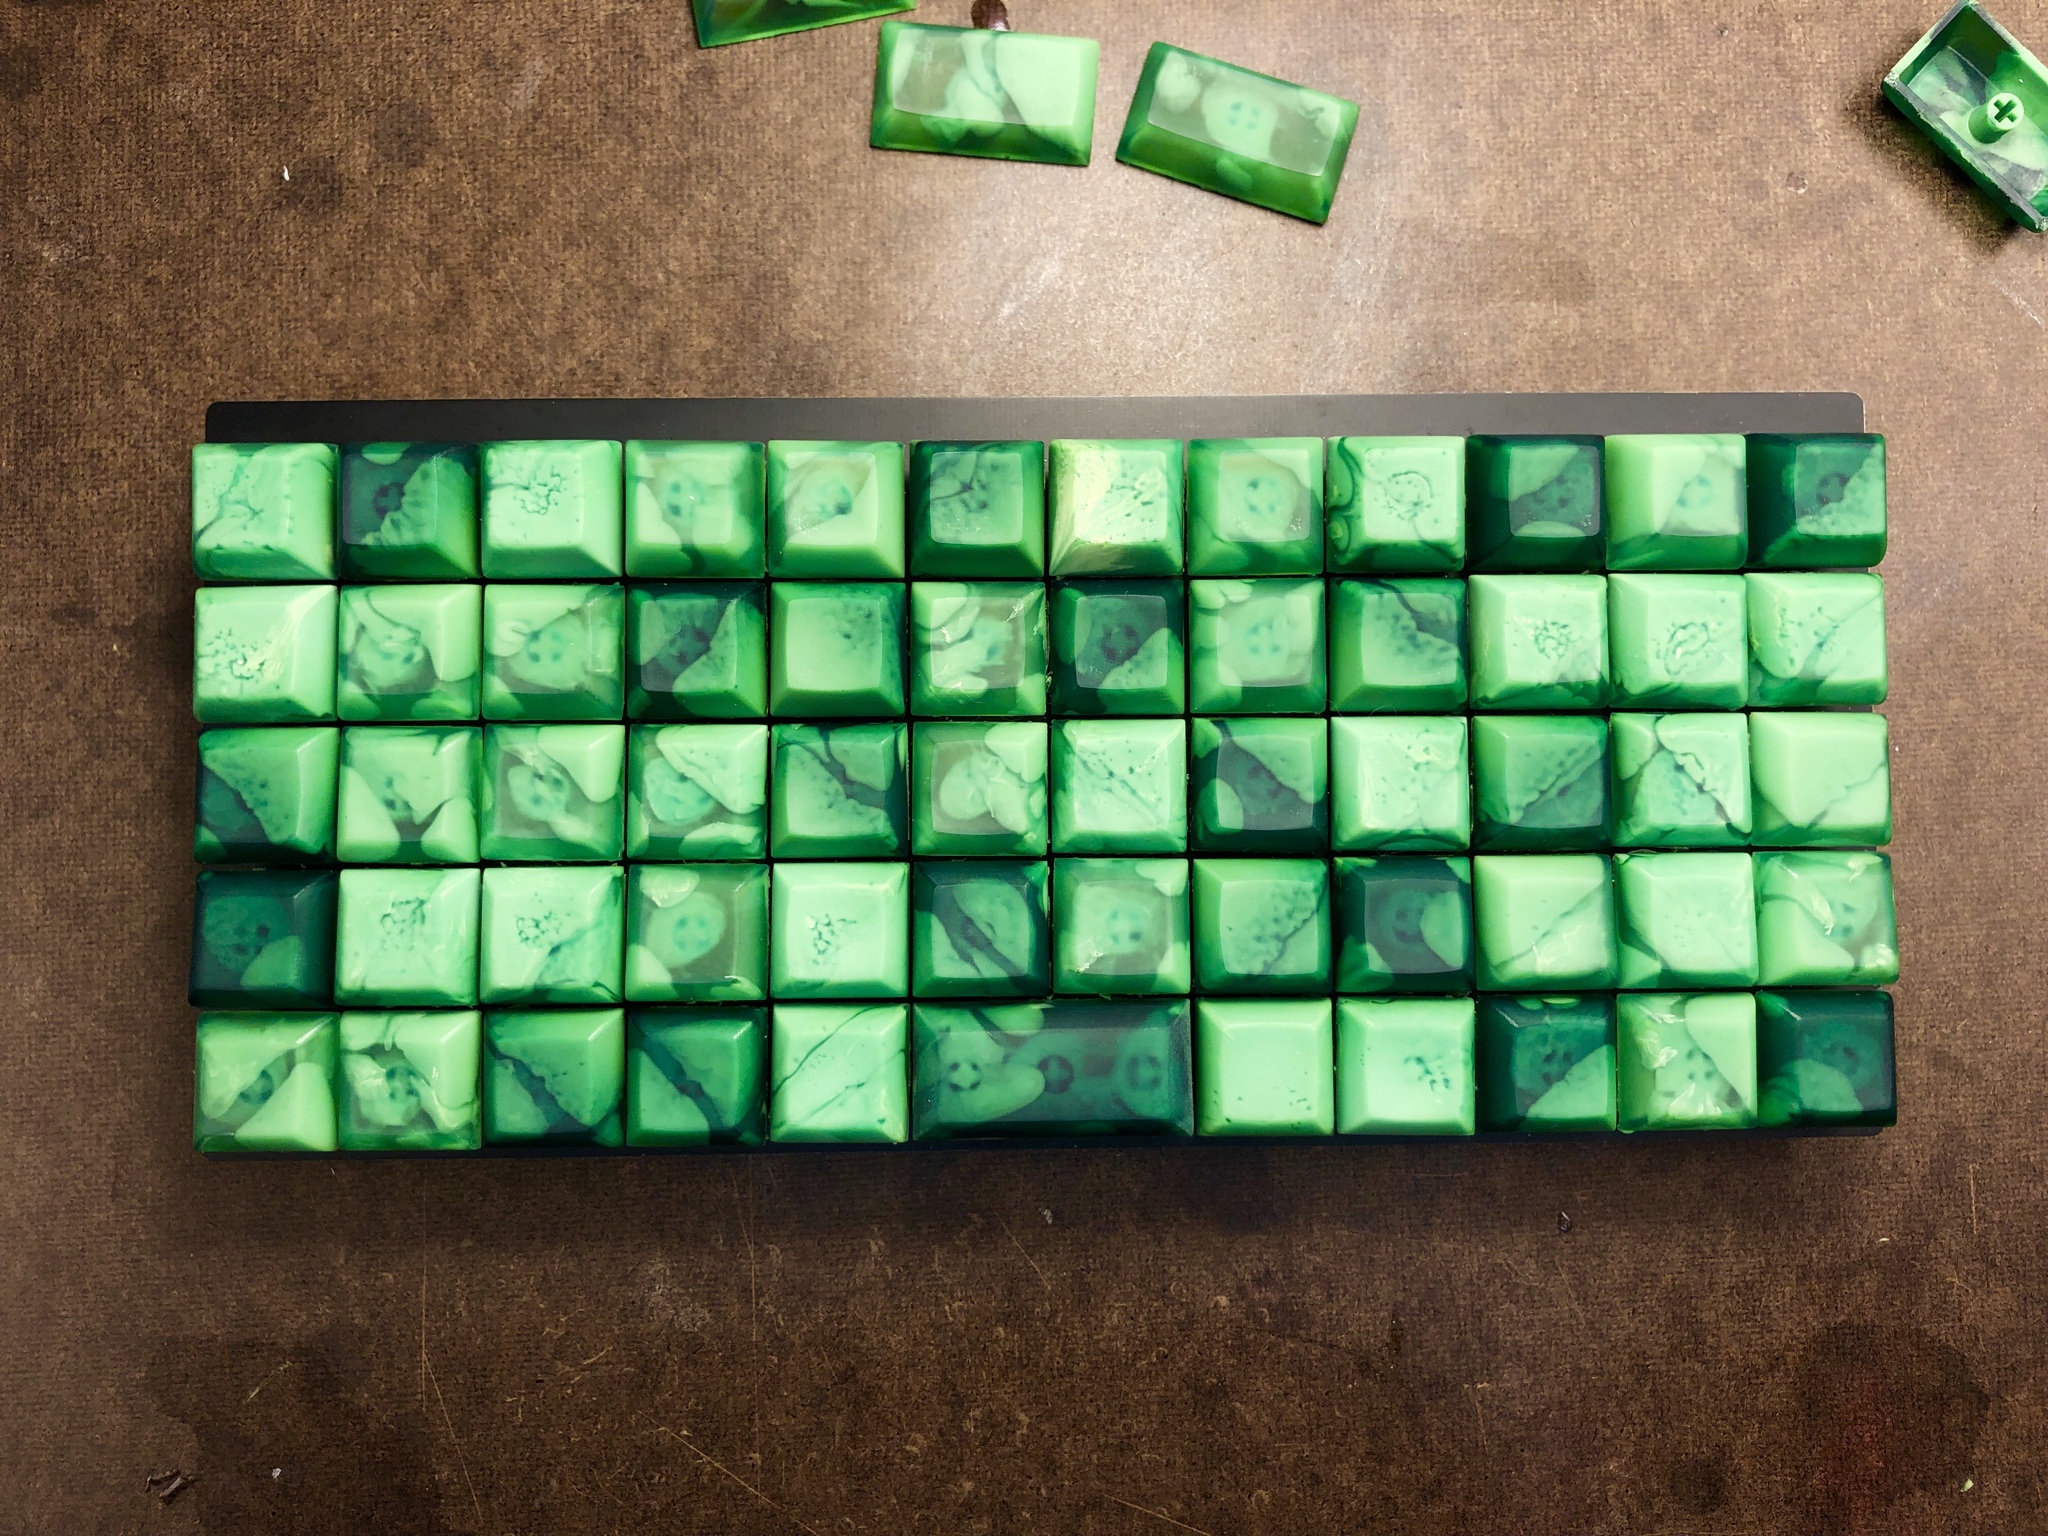 Green resin HuB keycaps on a Preonic